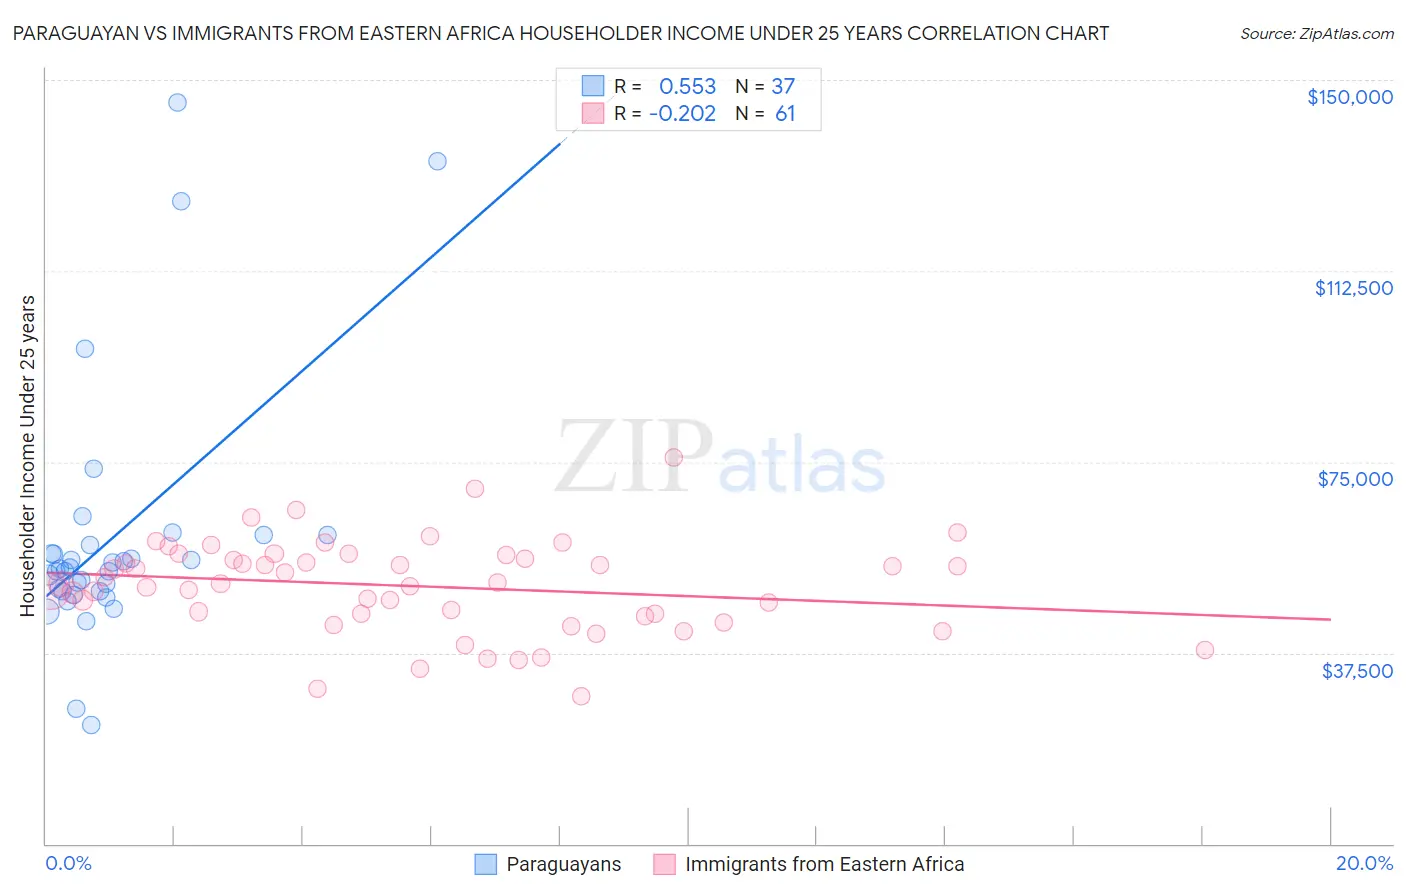 Paraguayan vs Immigrants from Eastern Africa Householder Income Under 25 years